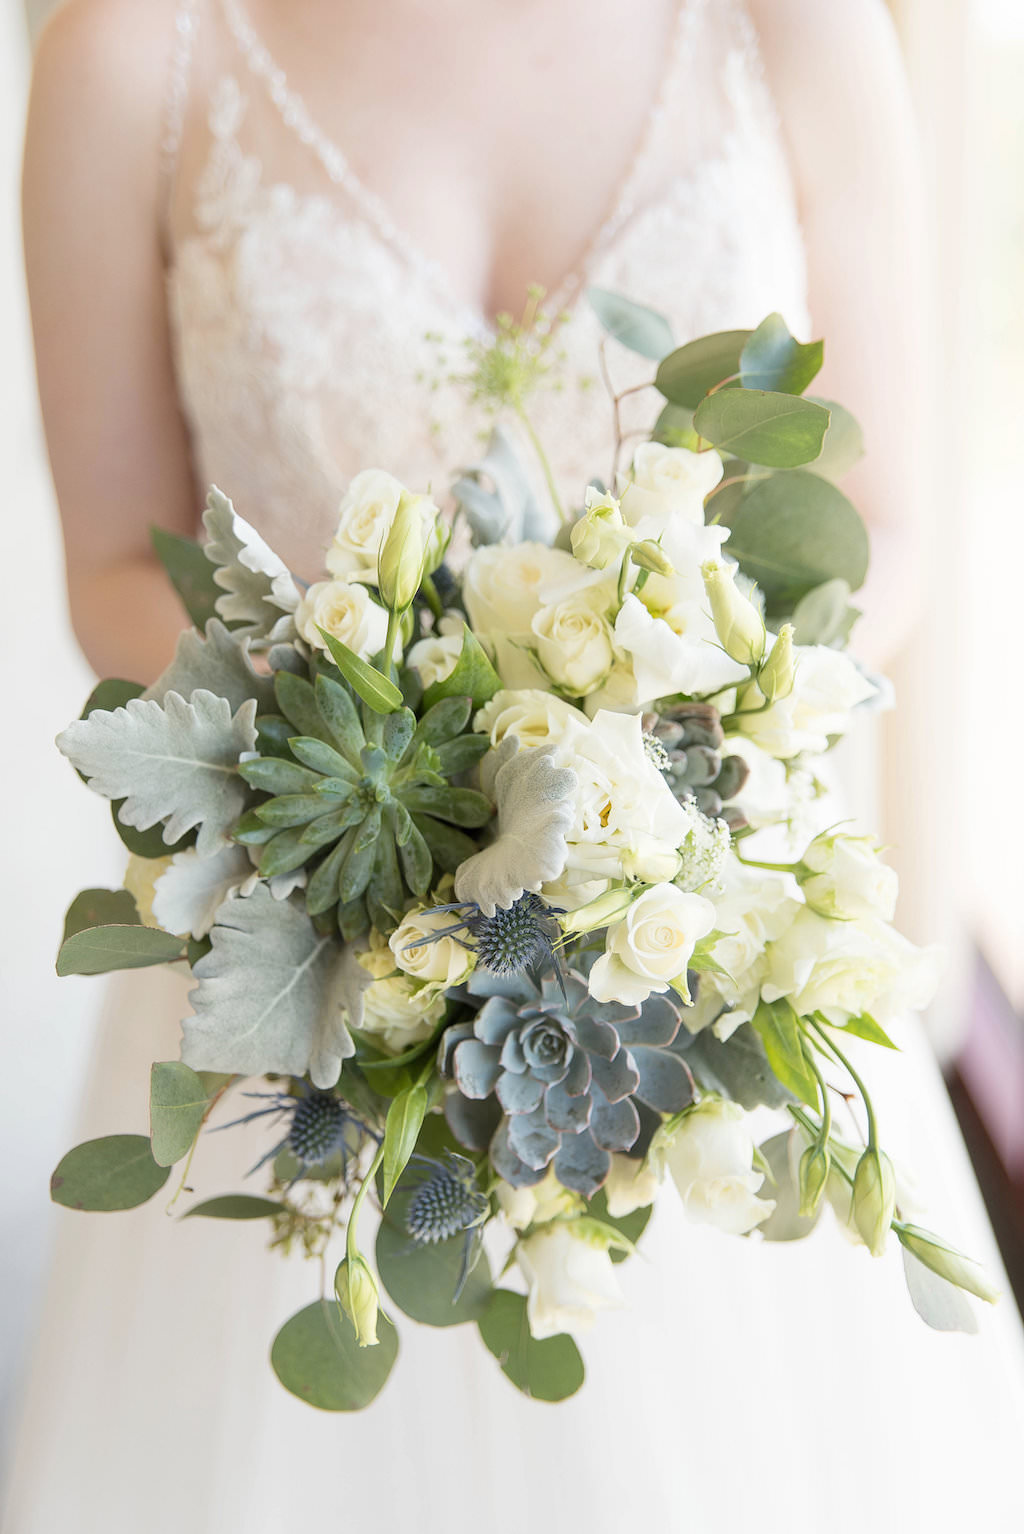 Indoor Bridal Portrait Watters Bride Plunge Line Lace Tank Strap Wedding Dress with White Roses Dusty Miller Succulents Bridal Bouquet | Tampa Bay Wedding Photographer Kristen Marie Photography